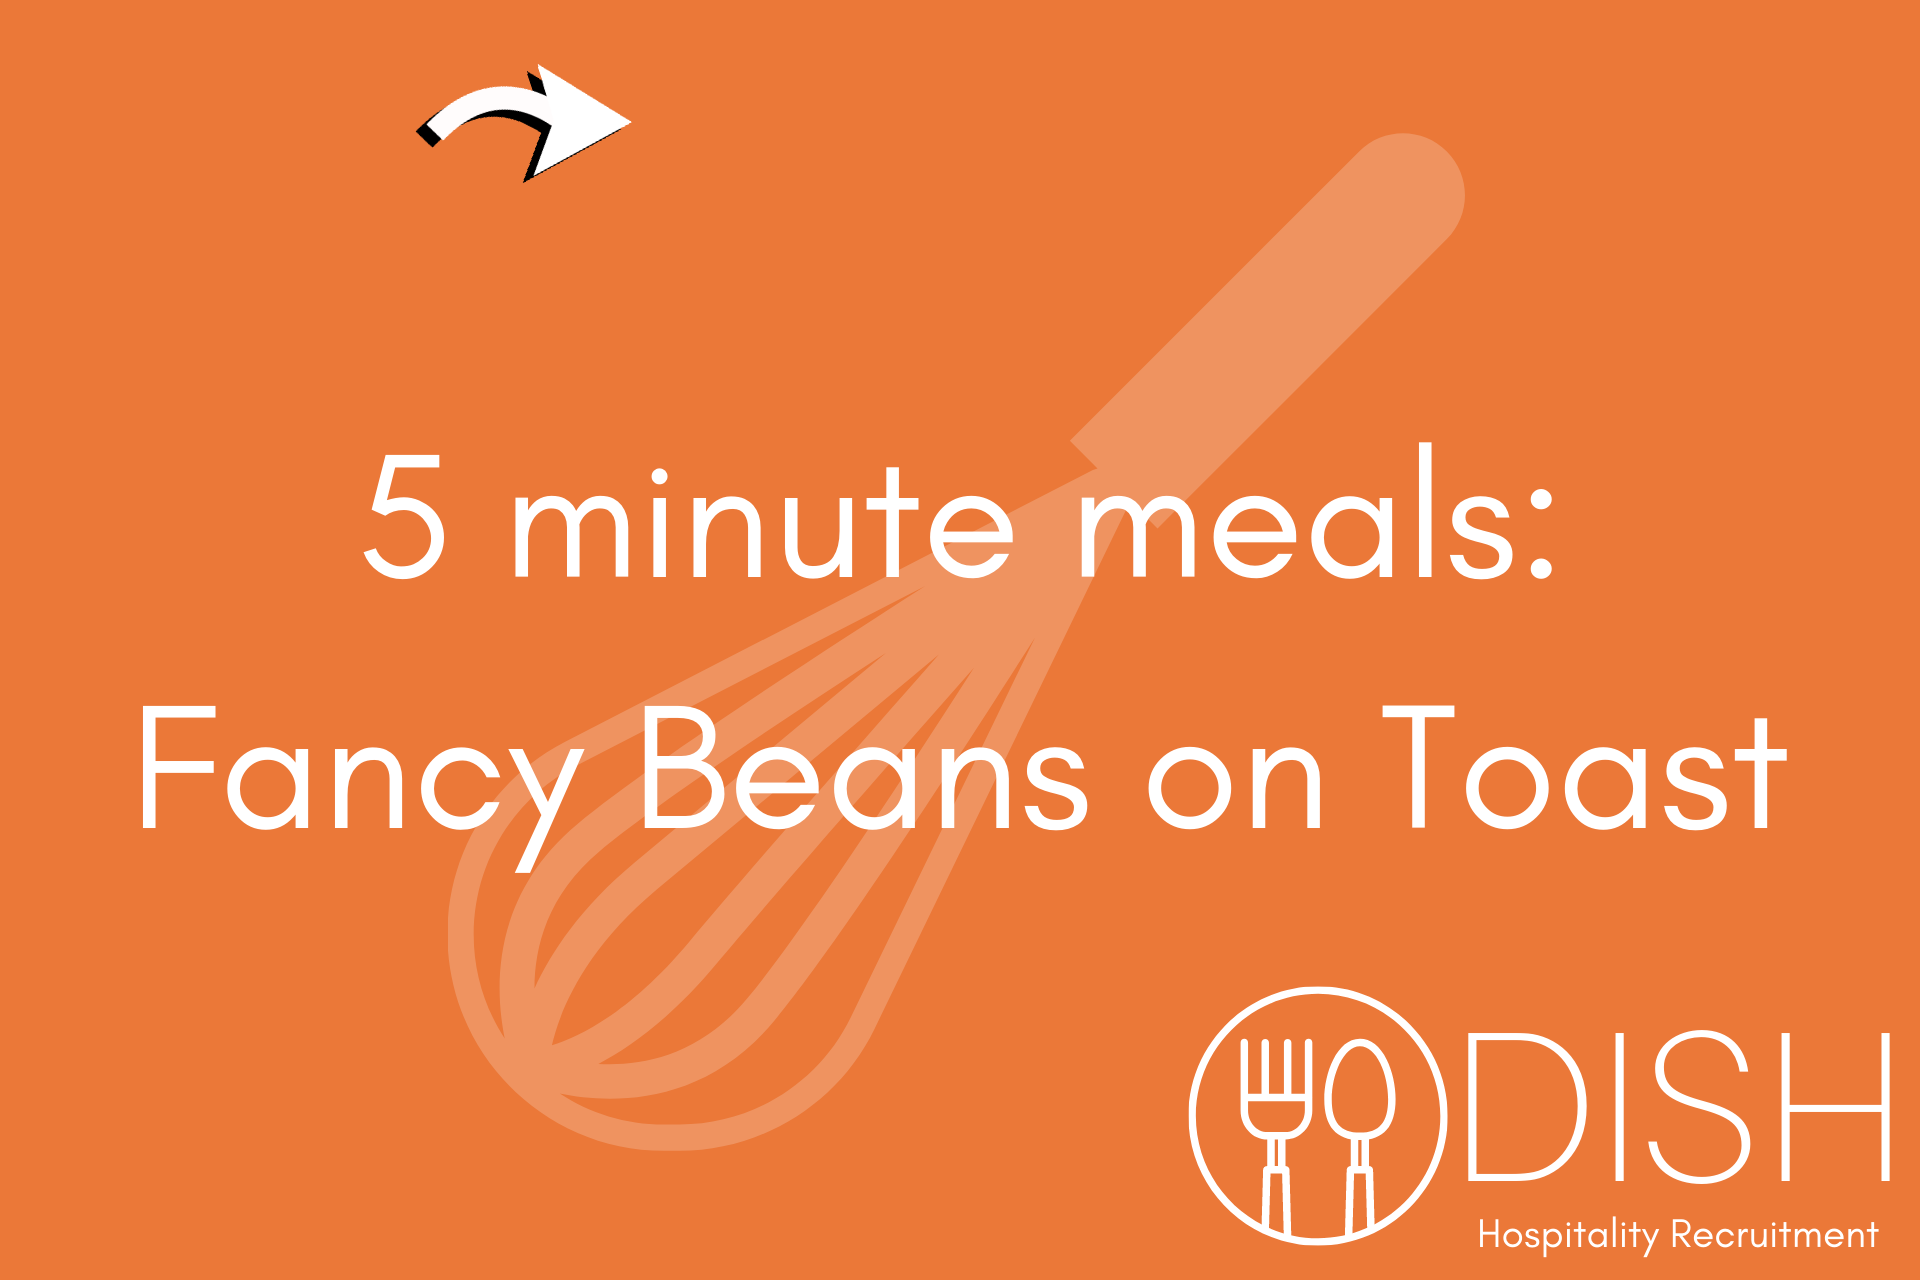 5 minute meals: Fancy Beans on Toast